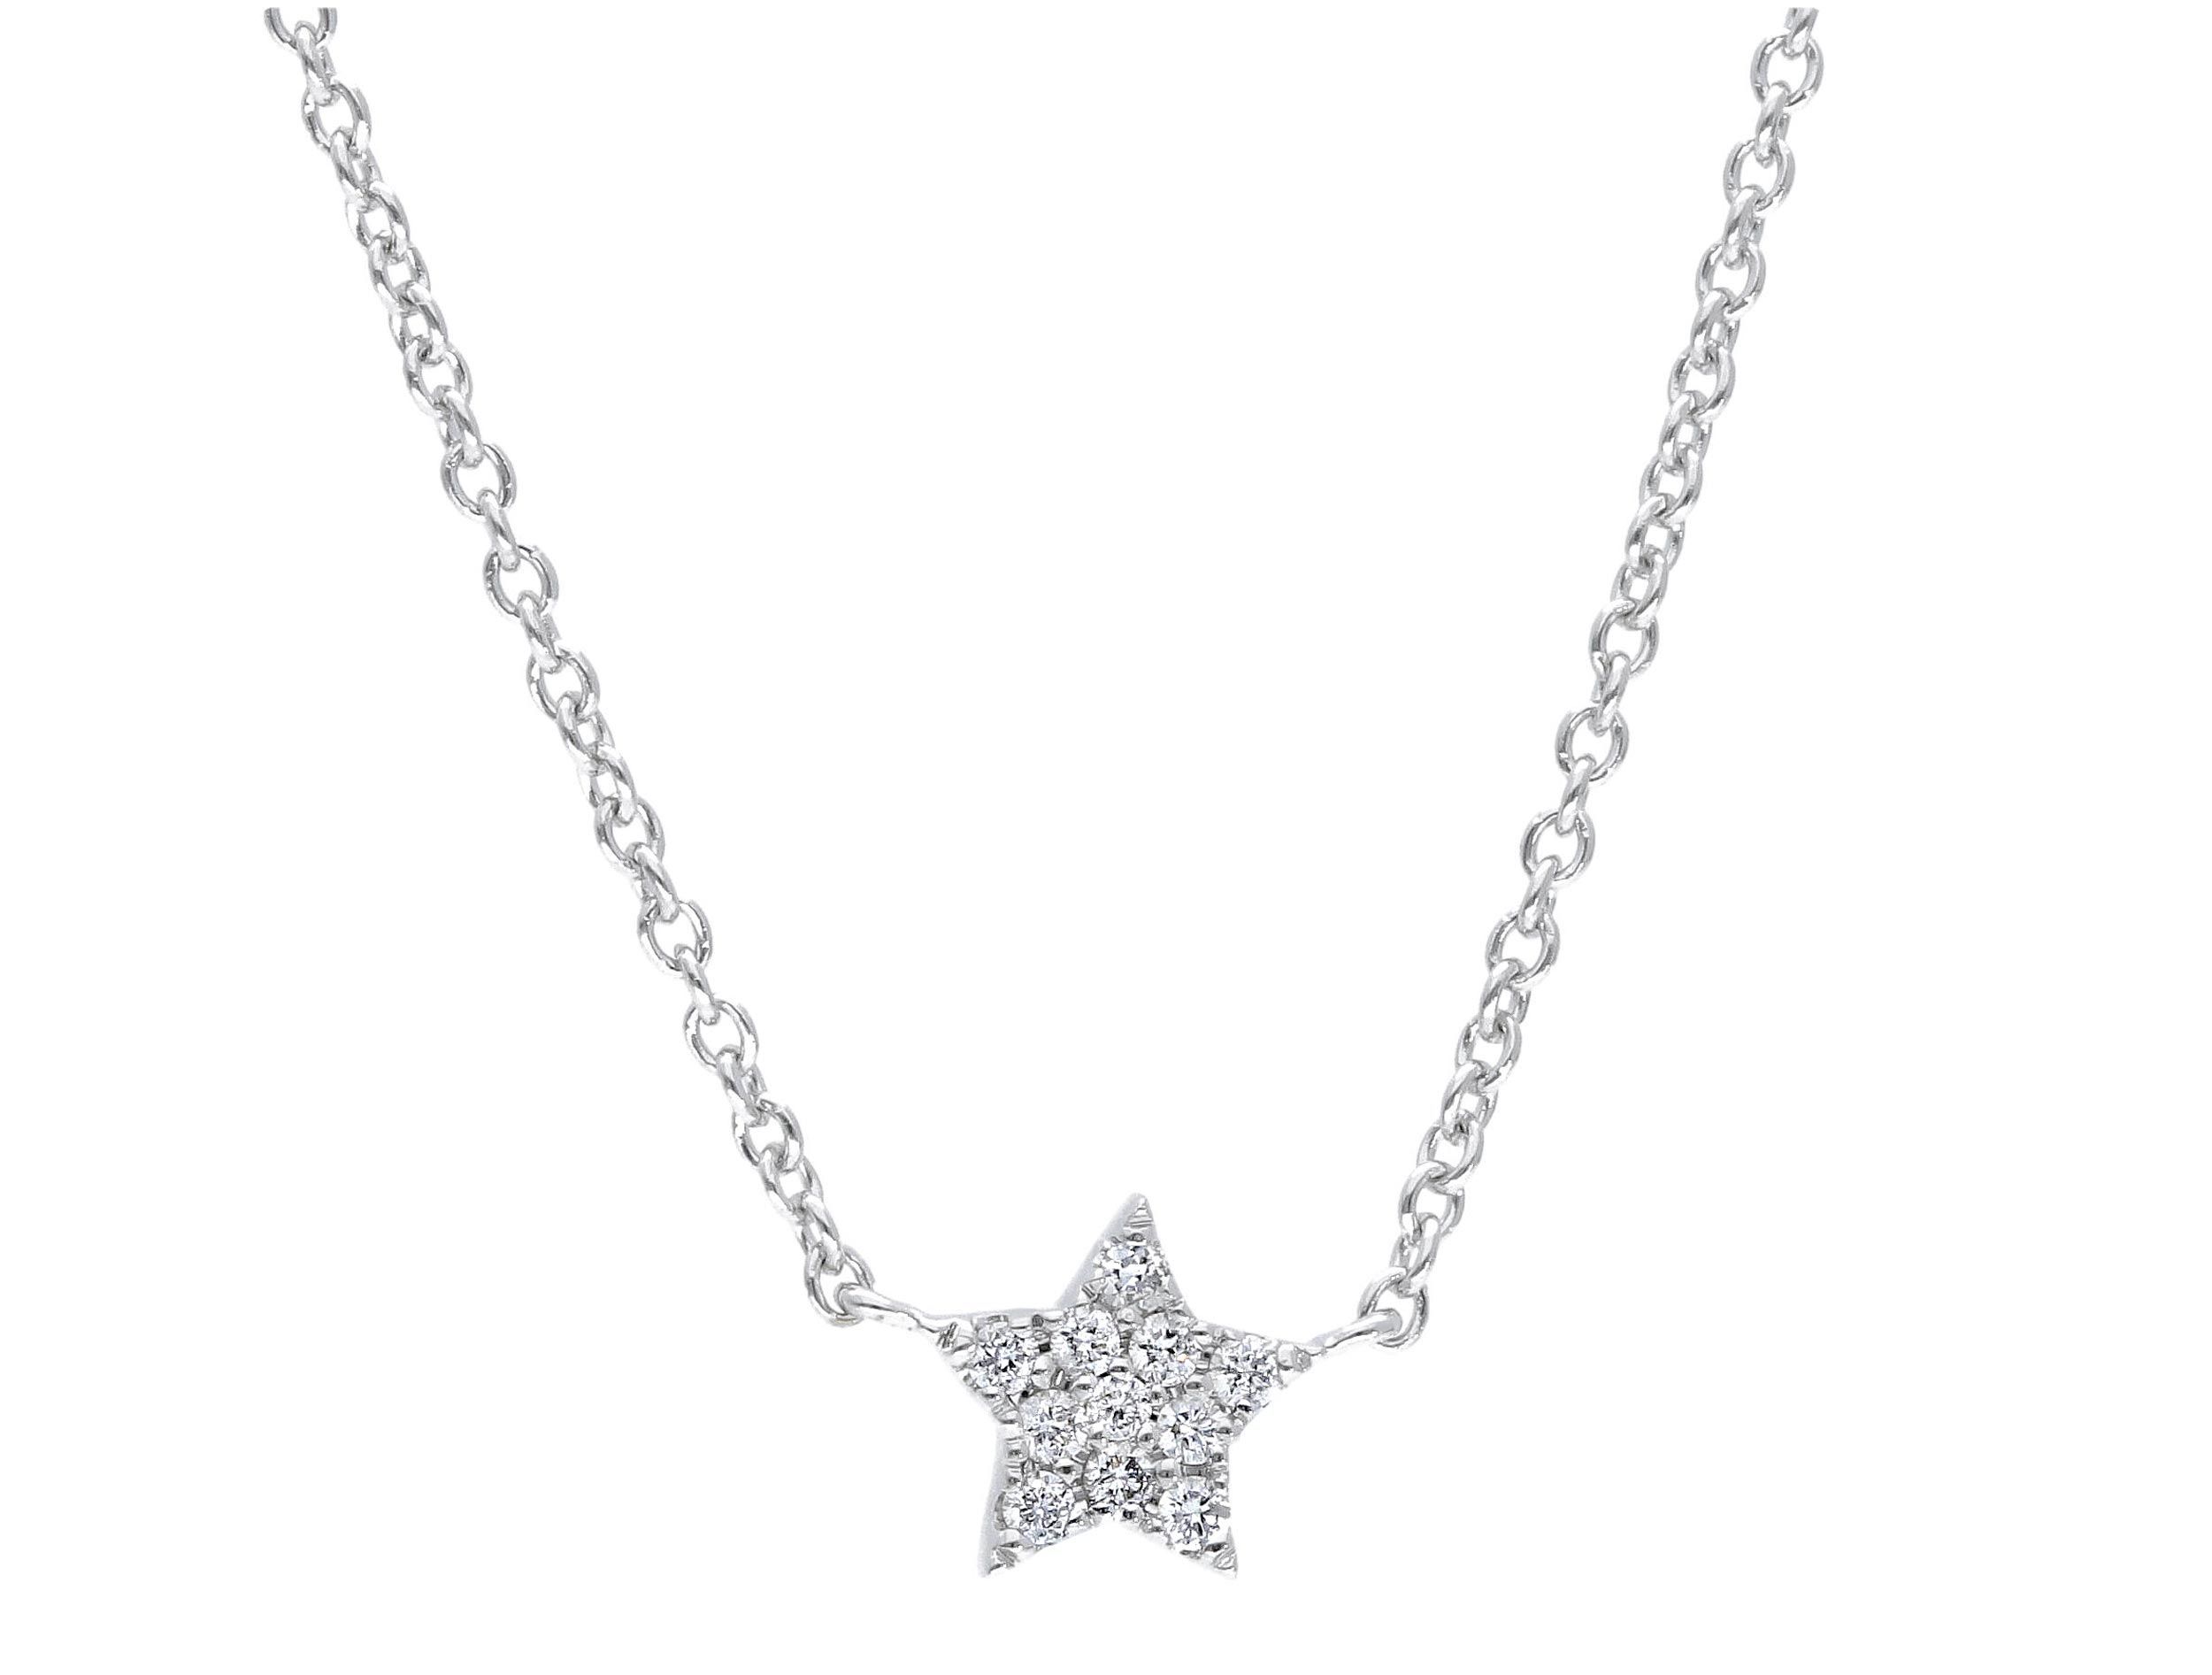  White gold necklace k18 with diamonds (code S247025)